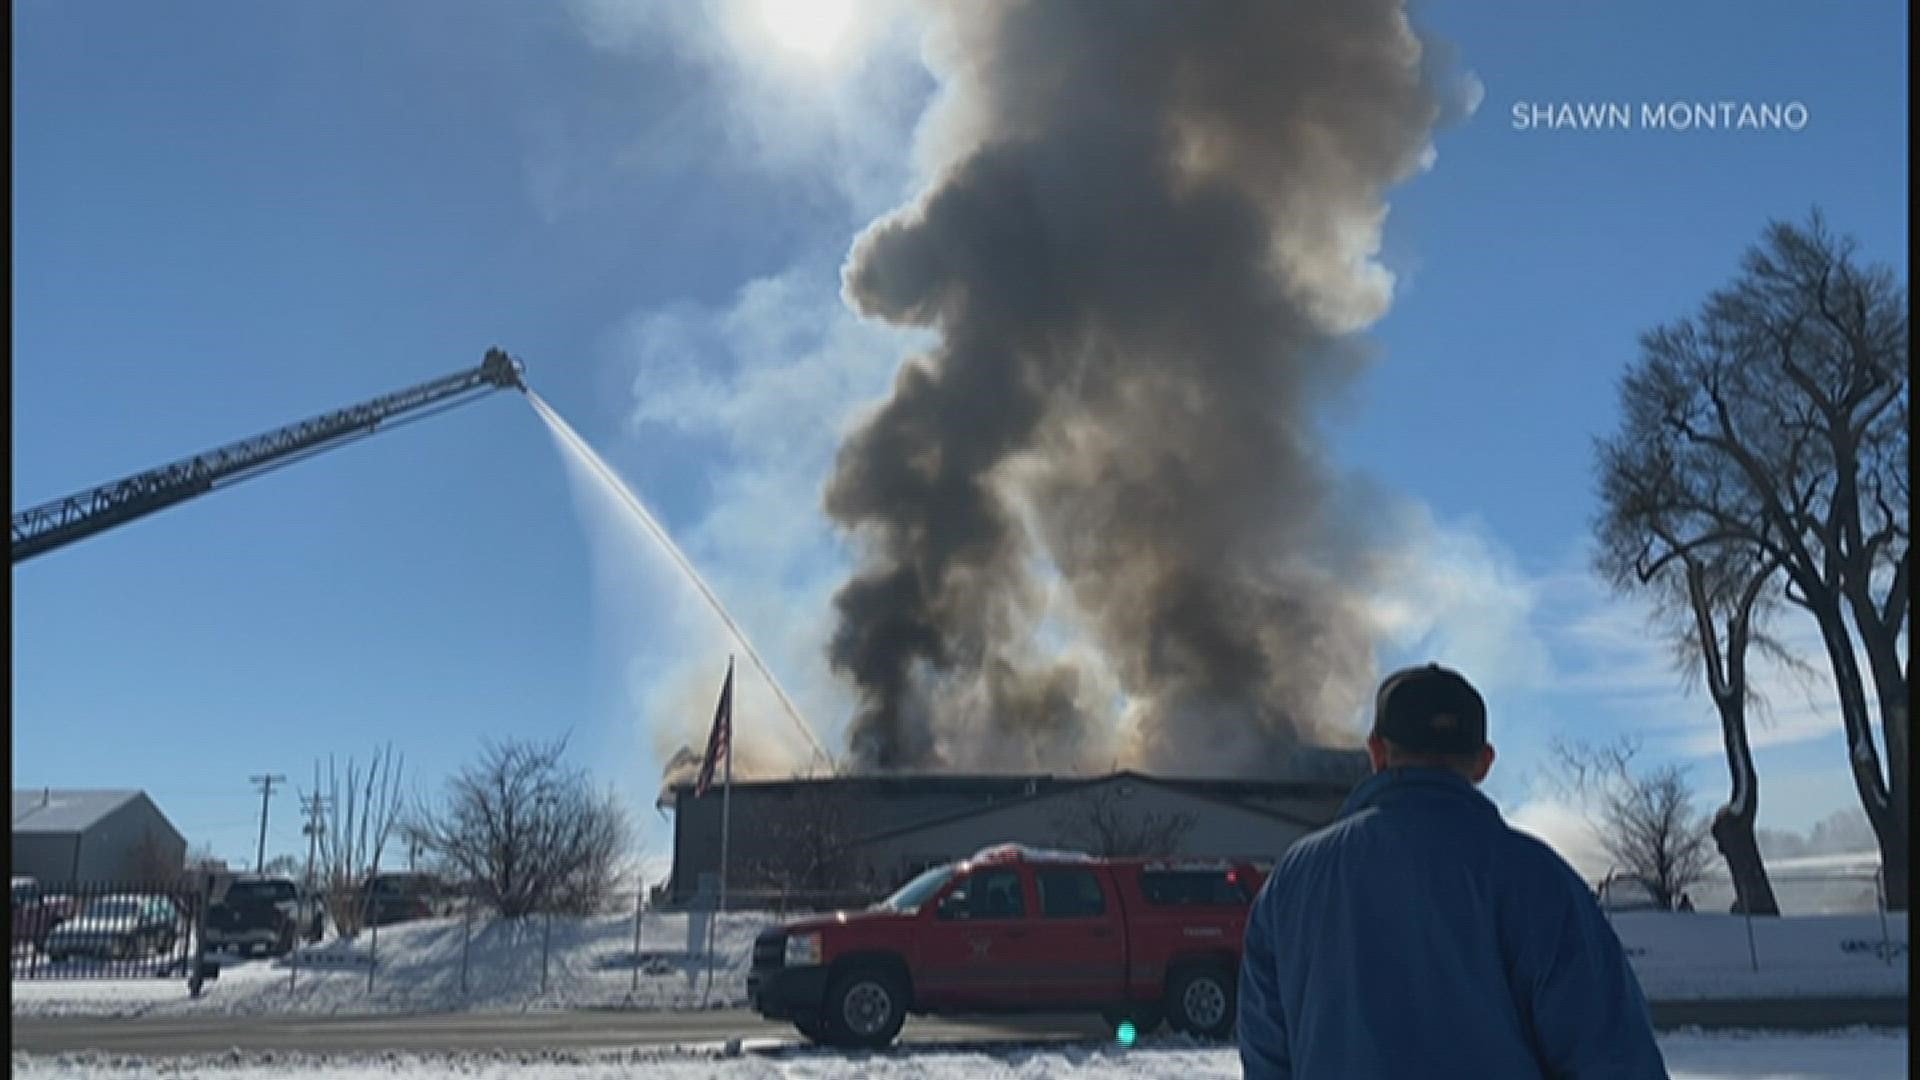 Greeley Fire reported no one has been injured in the blaze. The cause of the fire is still under investigation.